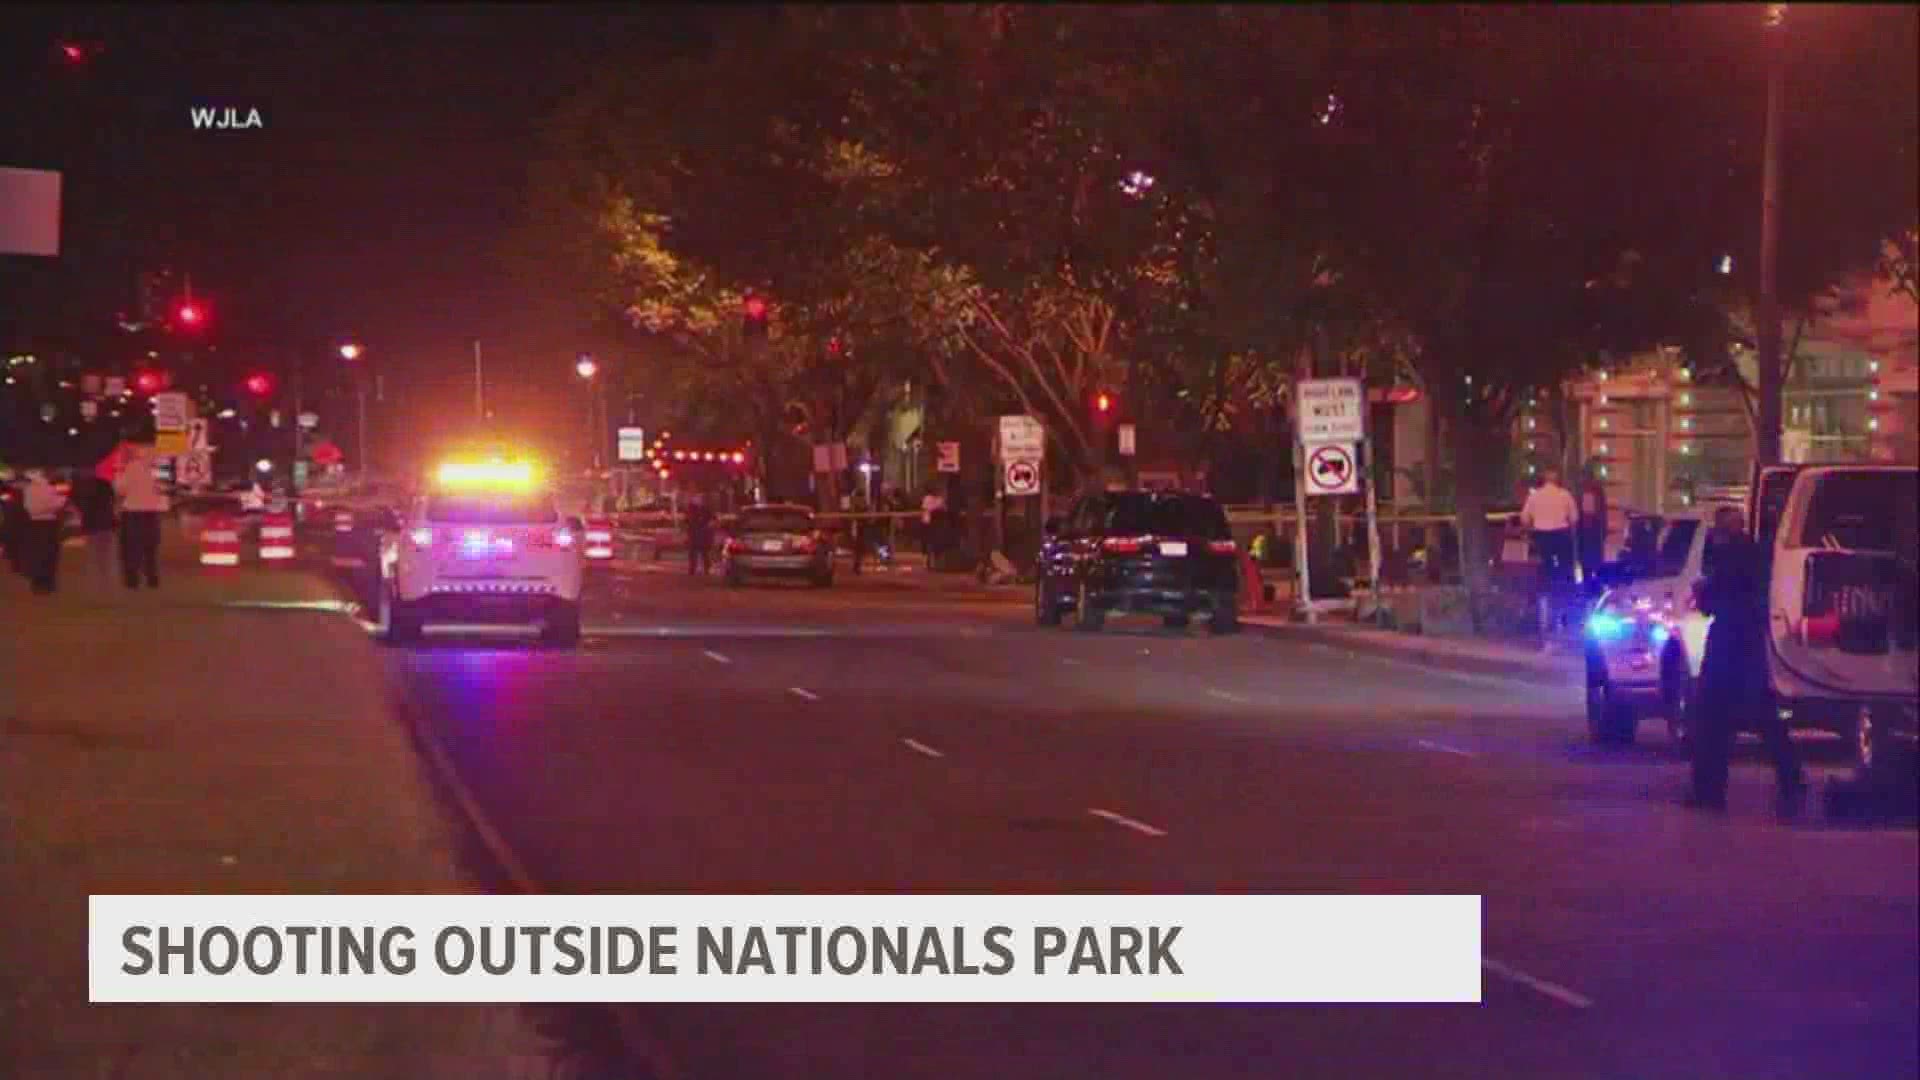 Police said two cars involved in a shootout caused the incident, which also injured a woman who had attended the game and was outside the stadium when she was shot.